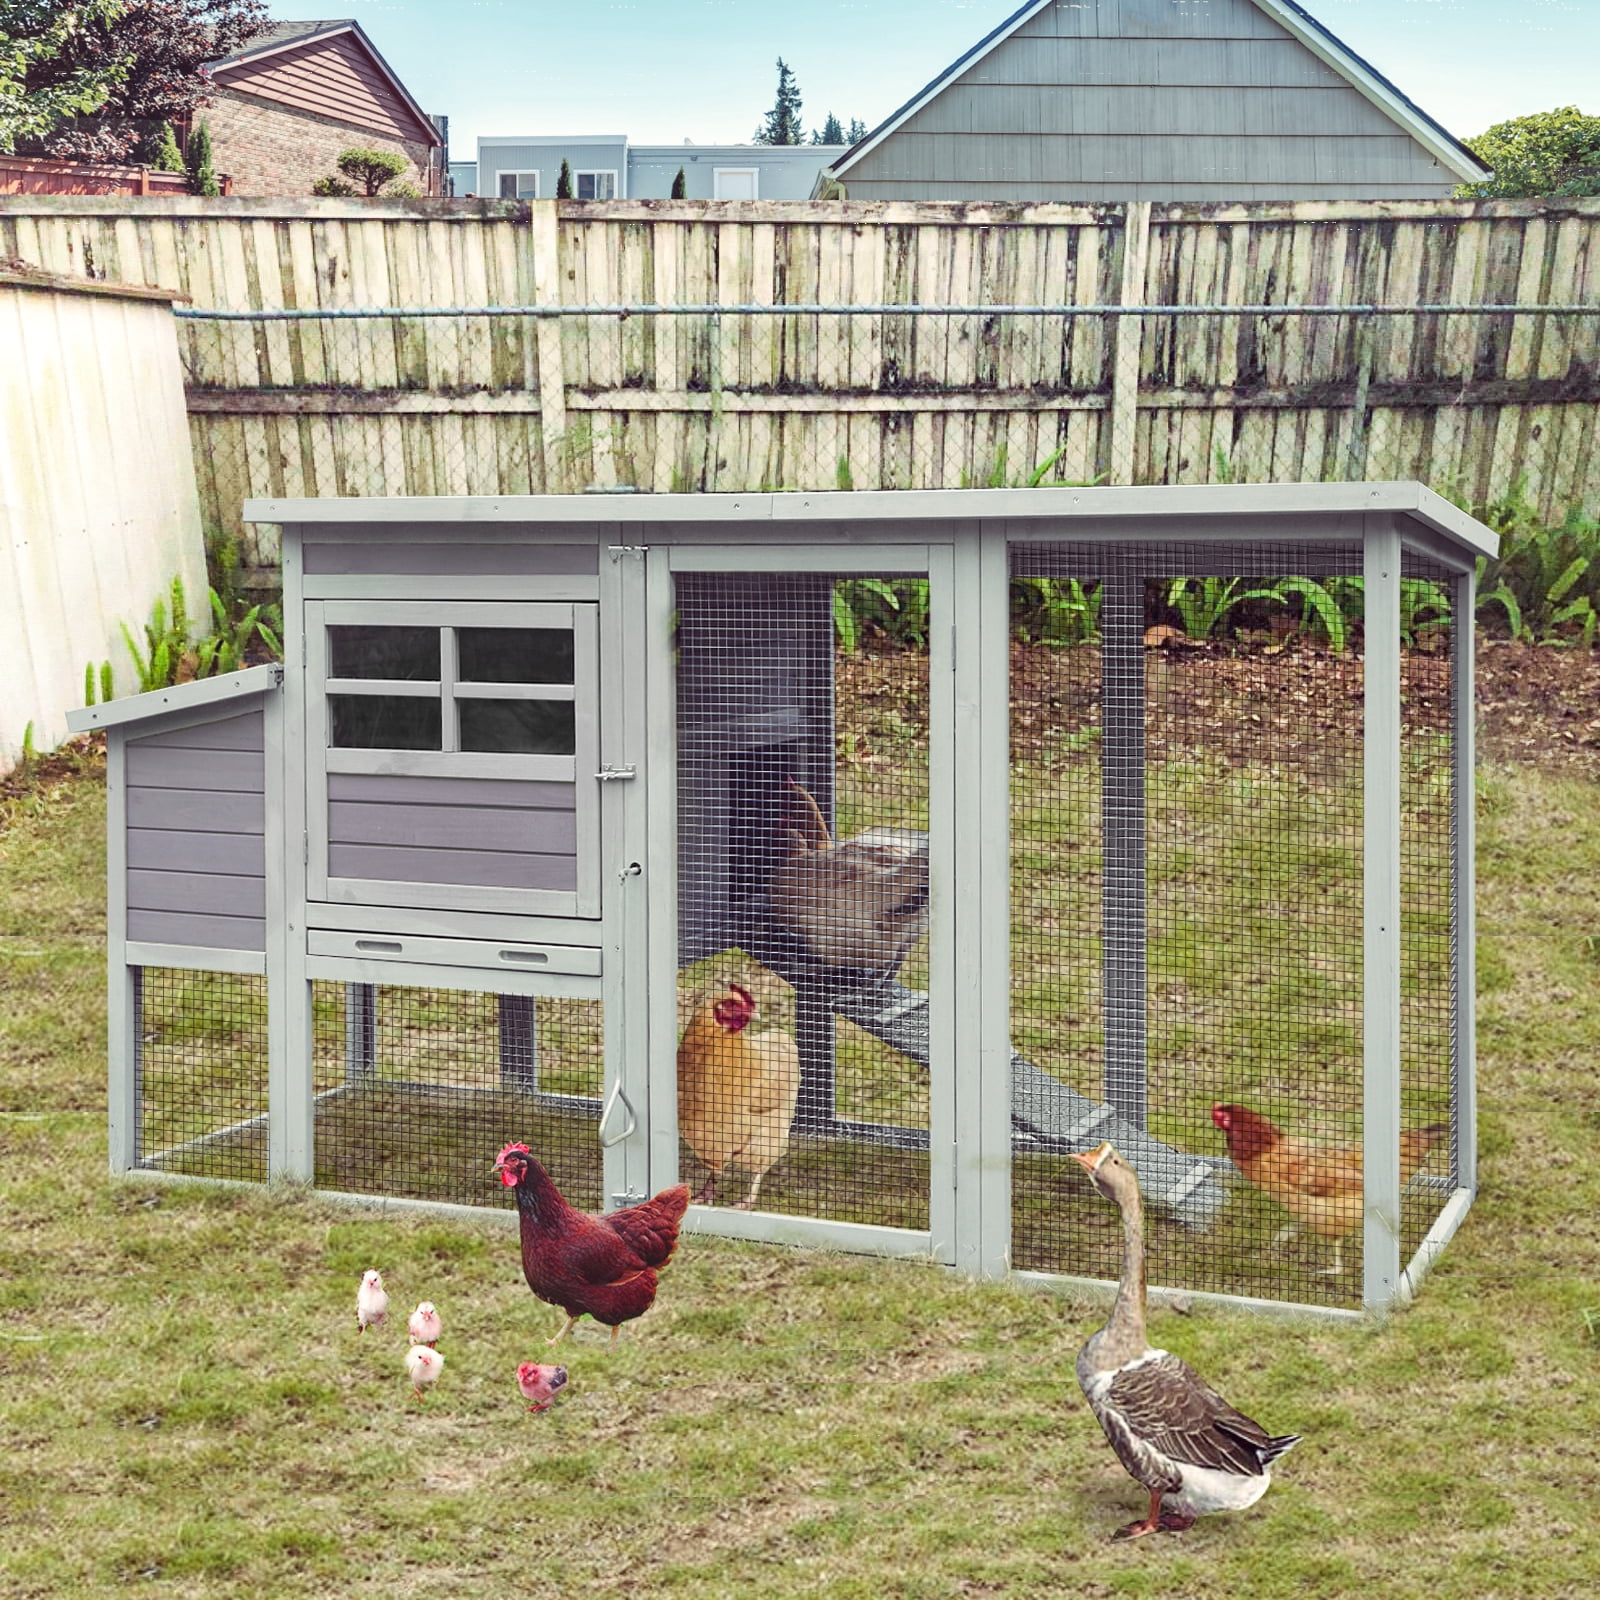 78" Big Wood Frame Plastic Hen Chicken Cage House Coop with Run nesting box 